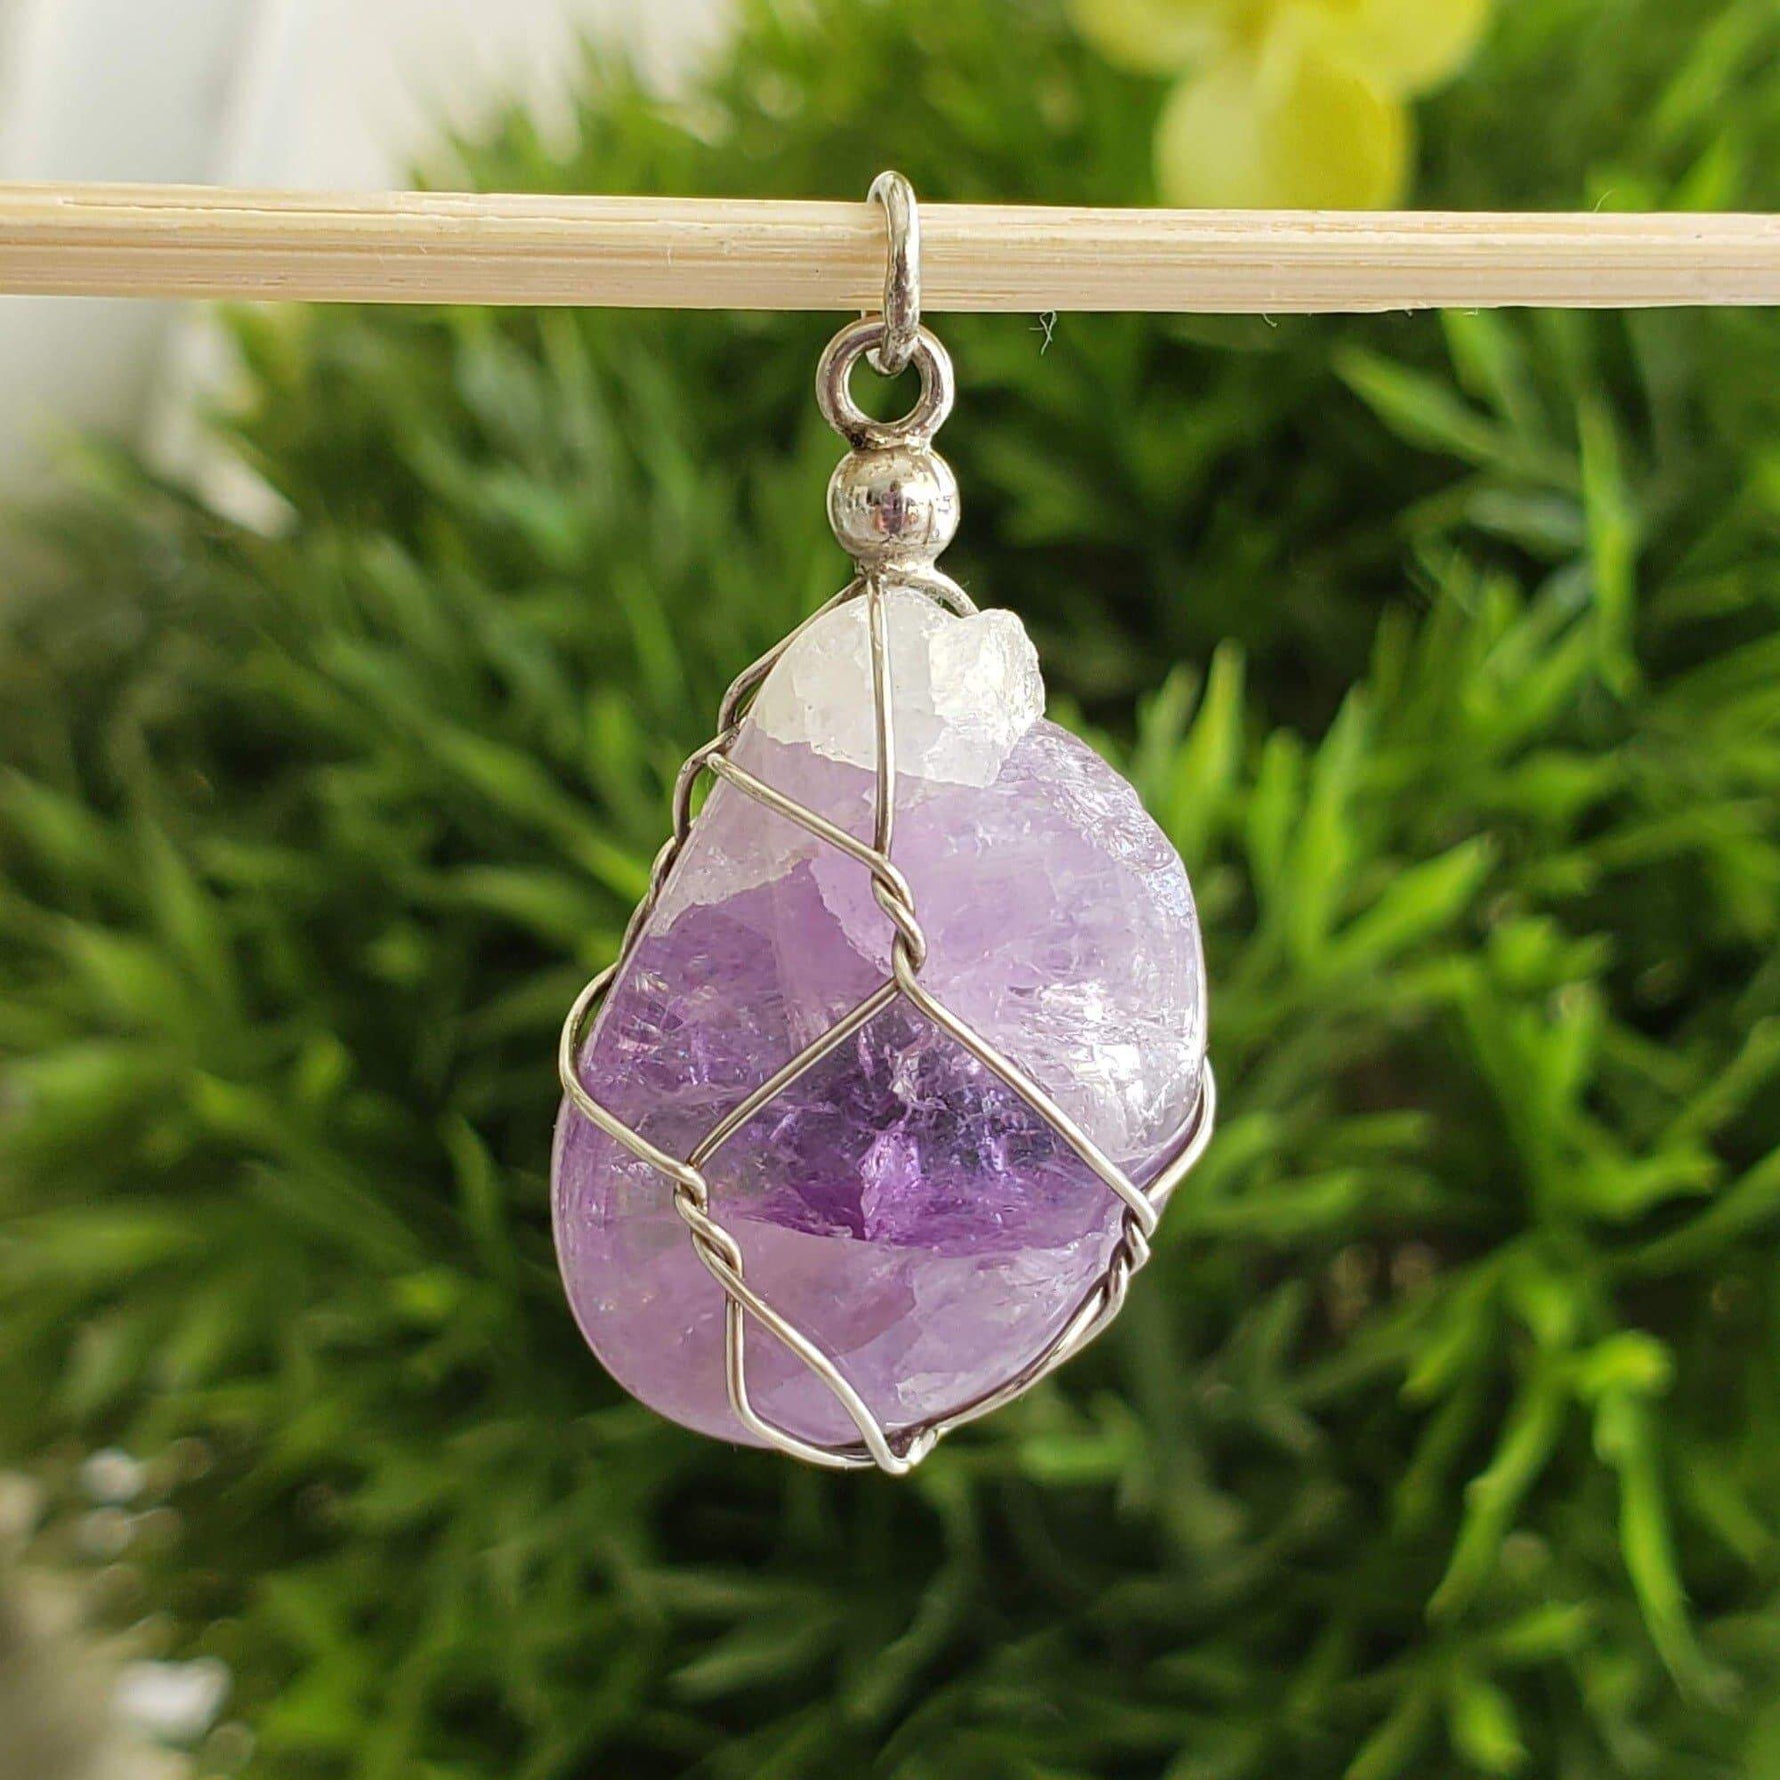 Amethyst Pendant | 925 Silver Wire Wrapped Pendant | Natural Tumbled Amethyst | Canagem.com